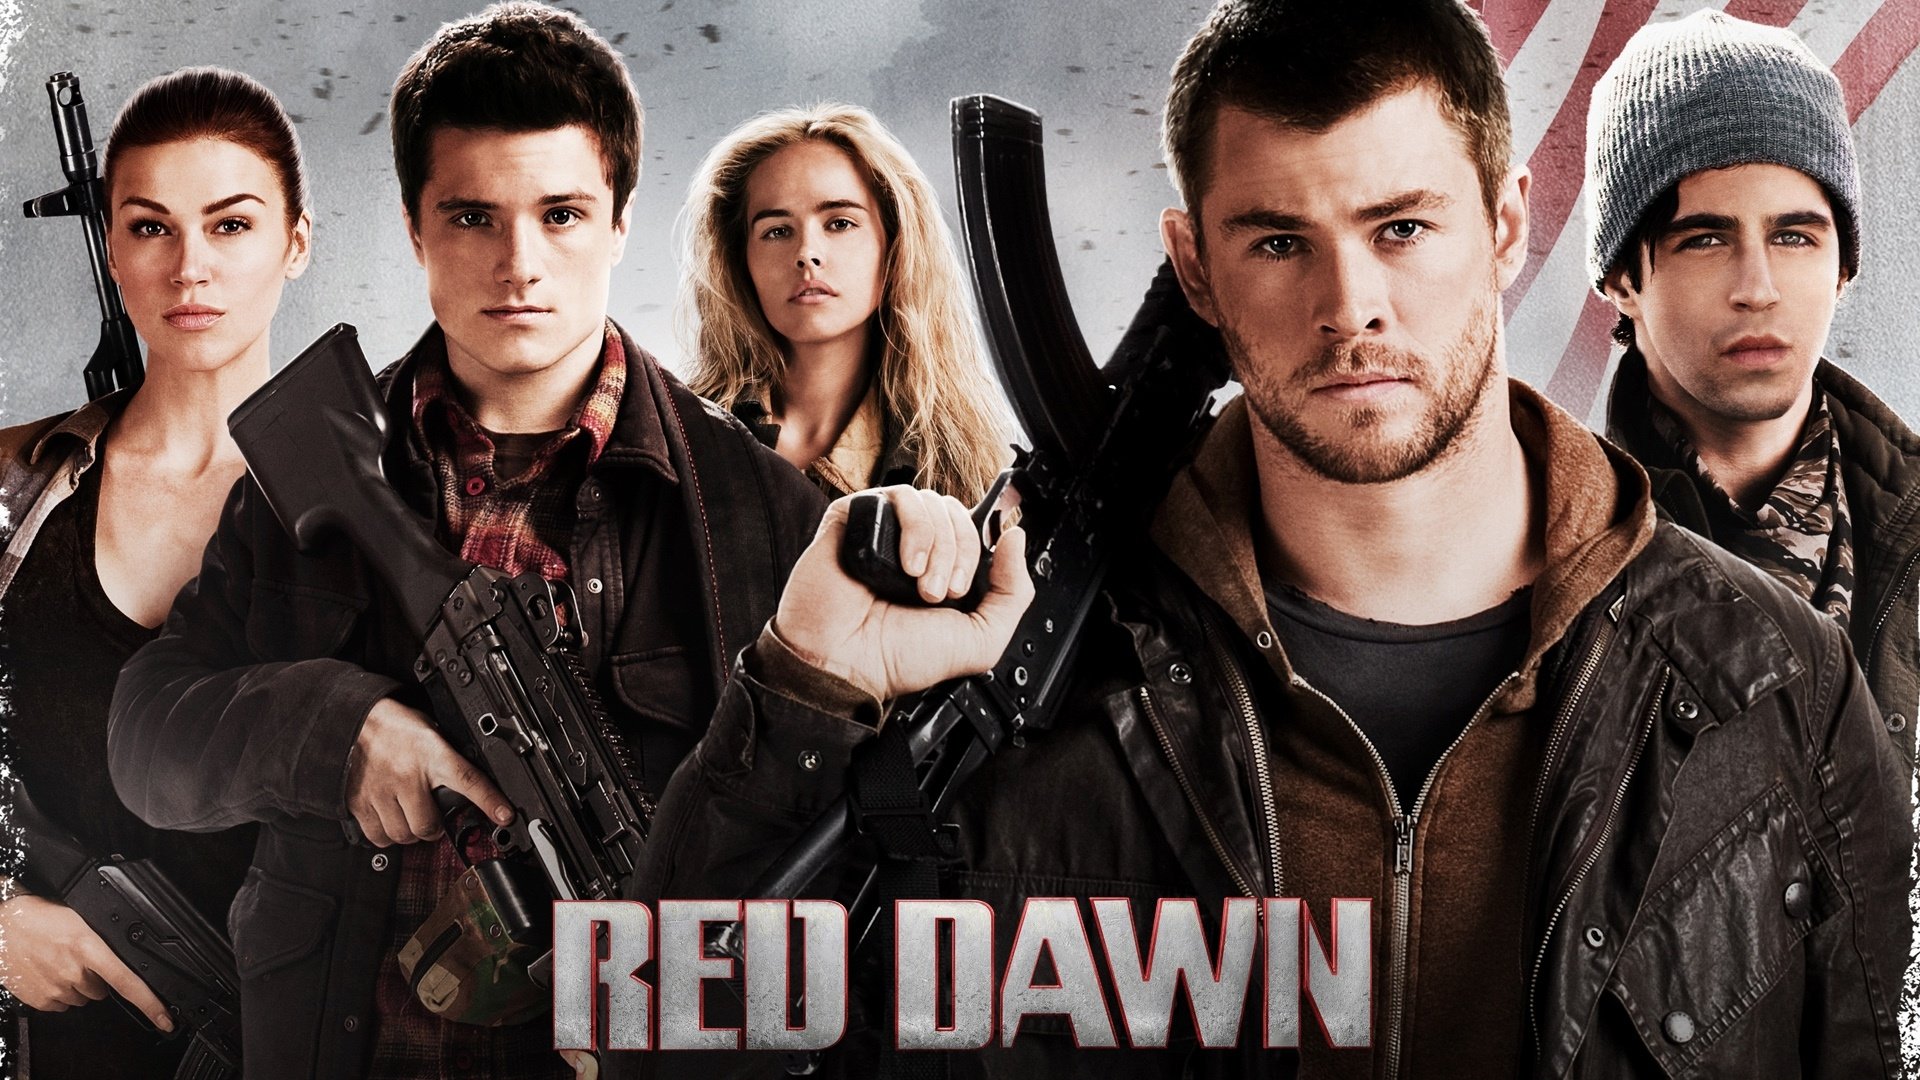 https://facts.net/wp-content/uploads/2023/06/47-facts-about-the-movie-red-dawn-1687709389.jpg